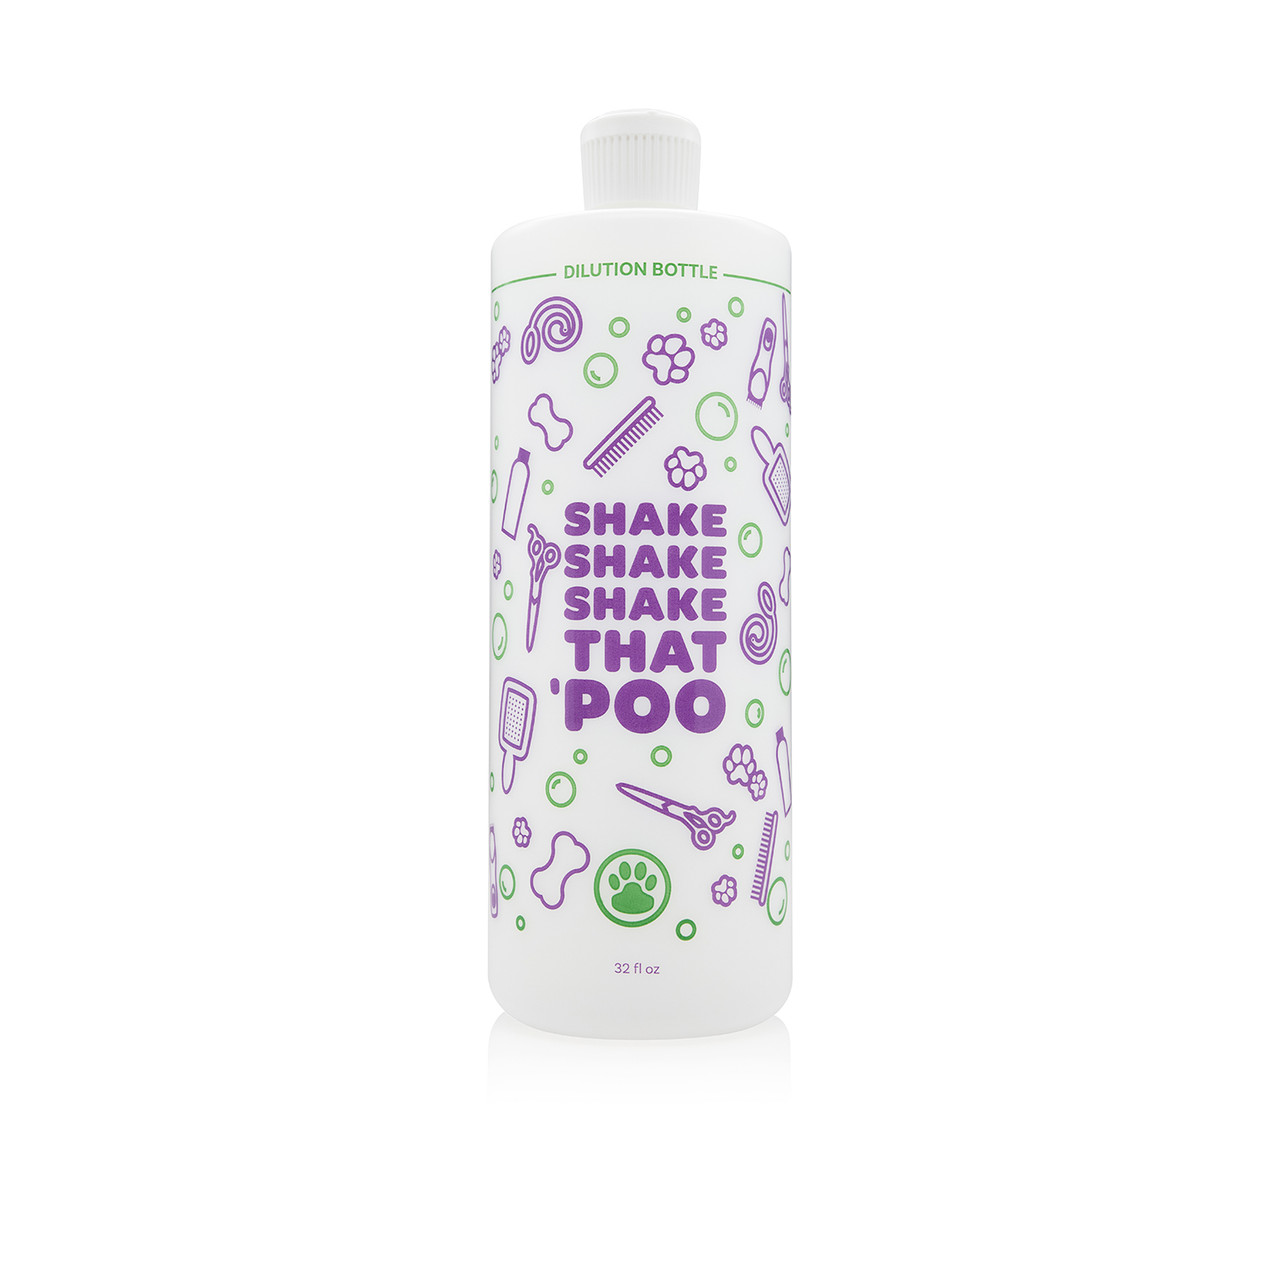 Groomer's Choice Shake That 'Poo Dilution Bottle